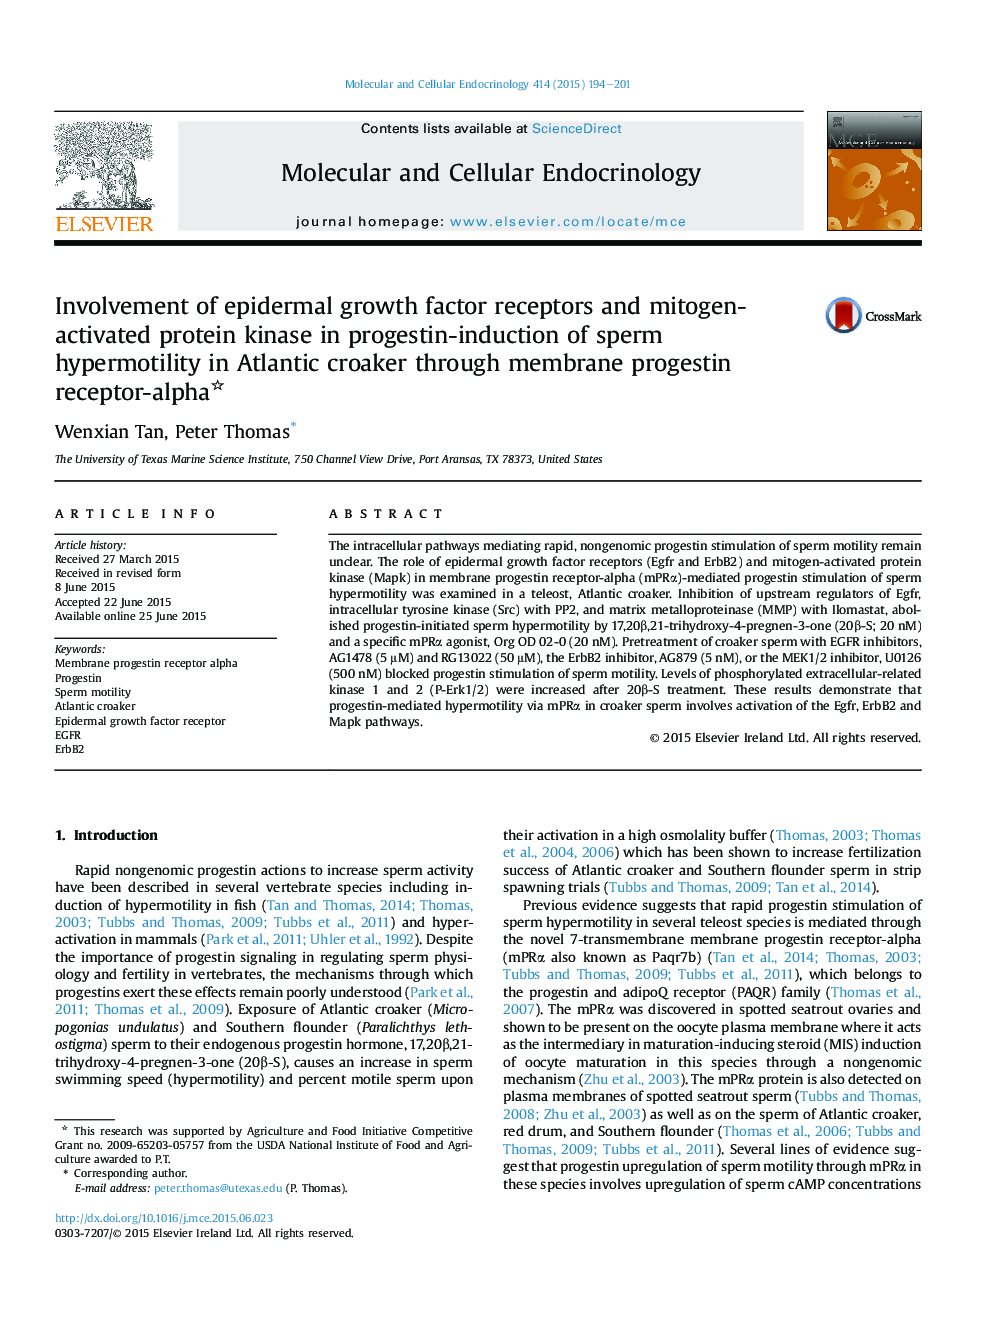 Involvement of epidermal growth factor receptors and mitogen-activated protein kinase in progestin-induction of sperm hypermotility in Atlantic croaker through membrane progestin receptor-alpha